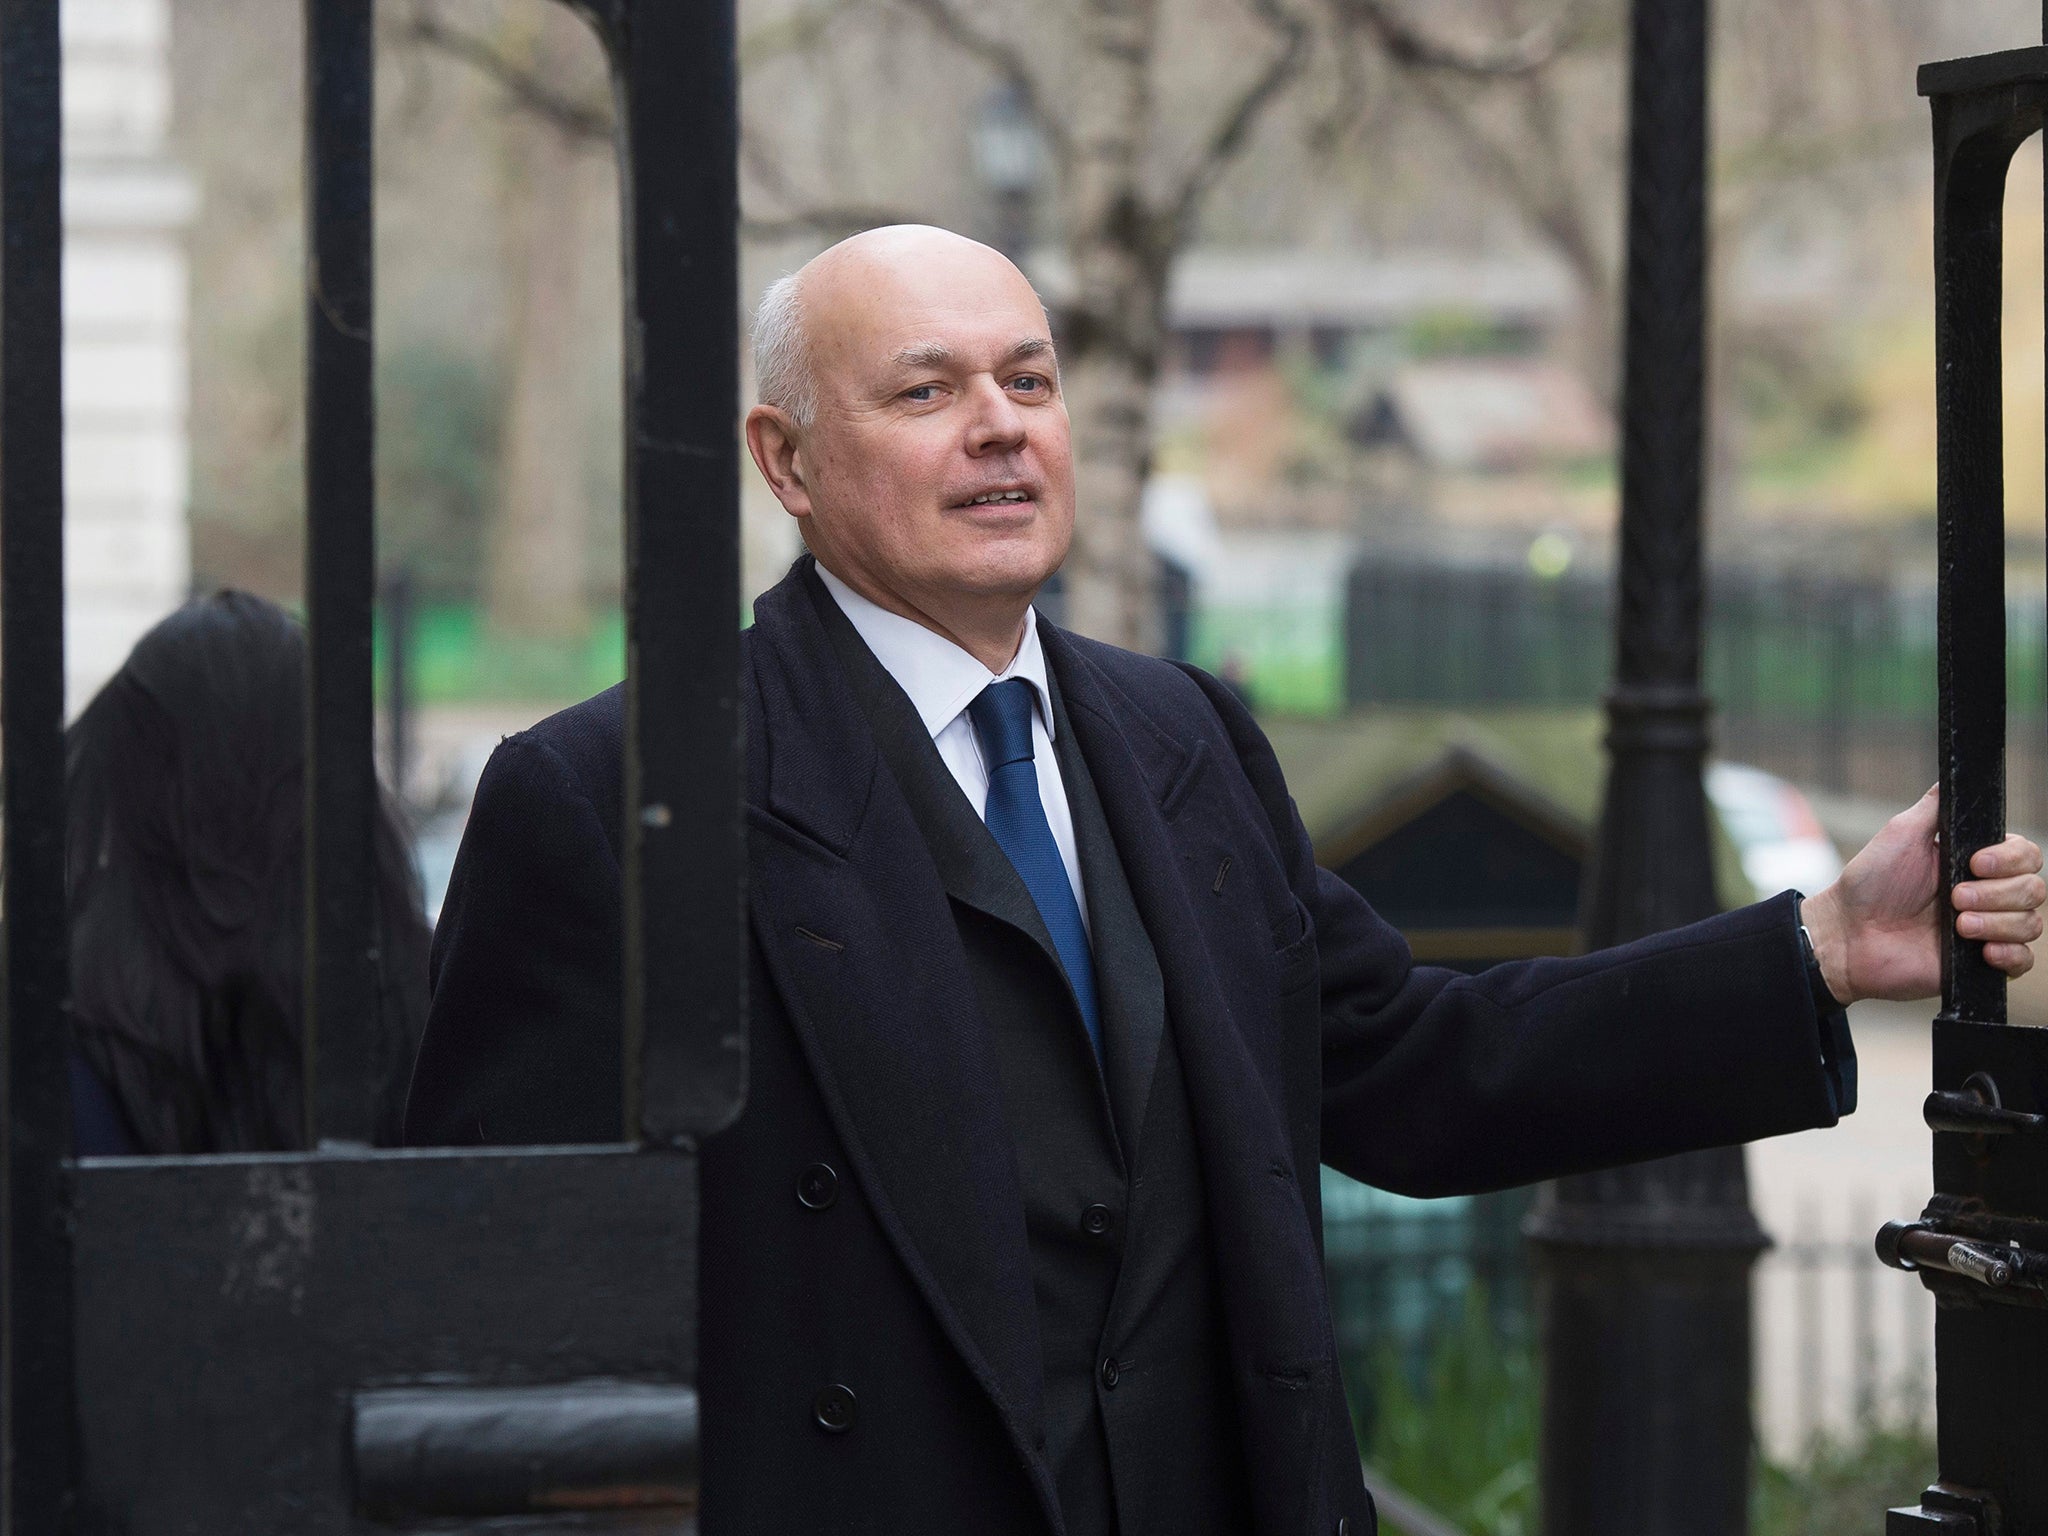 Iain Duncan Smith leaves a cabinet meeting at 10 Downing Street, Central London